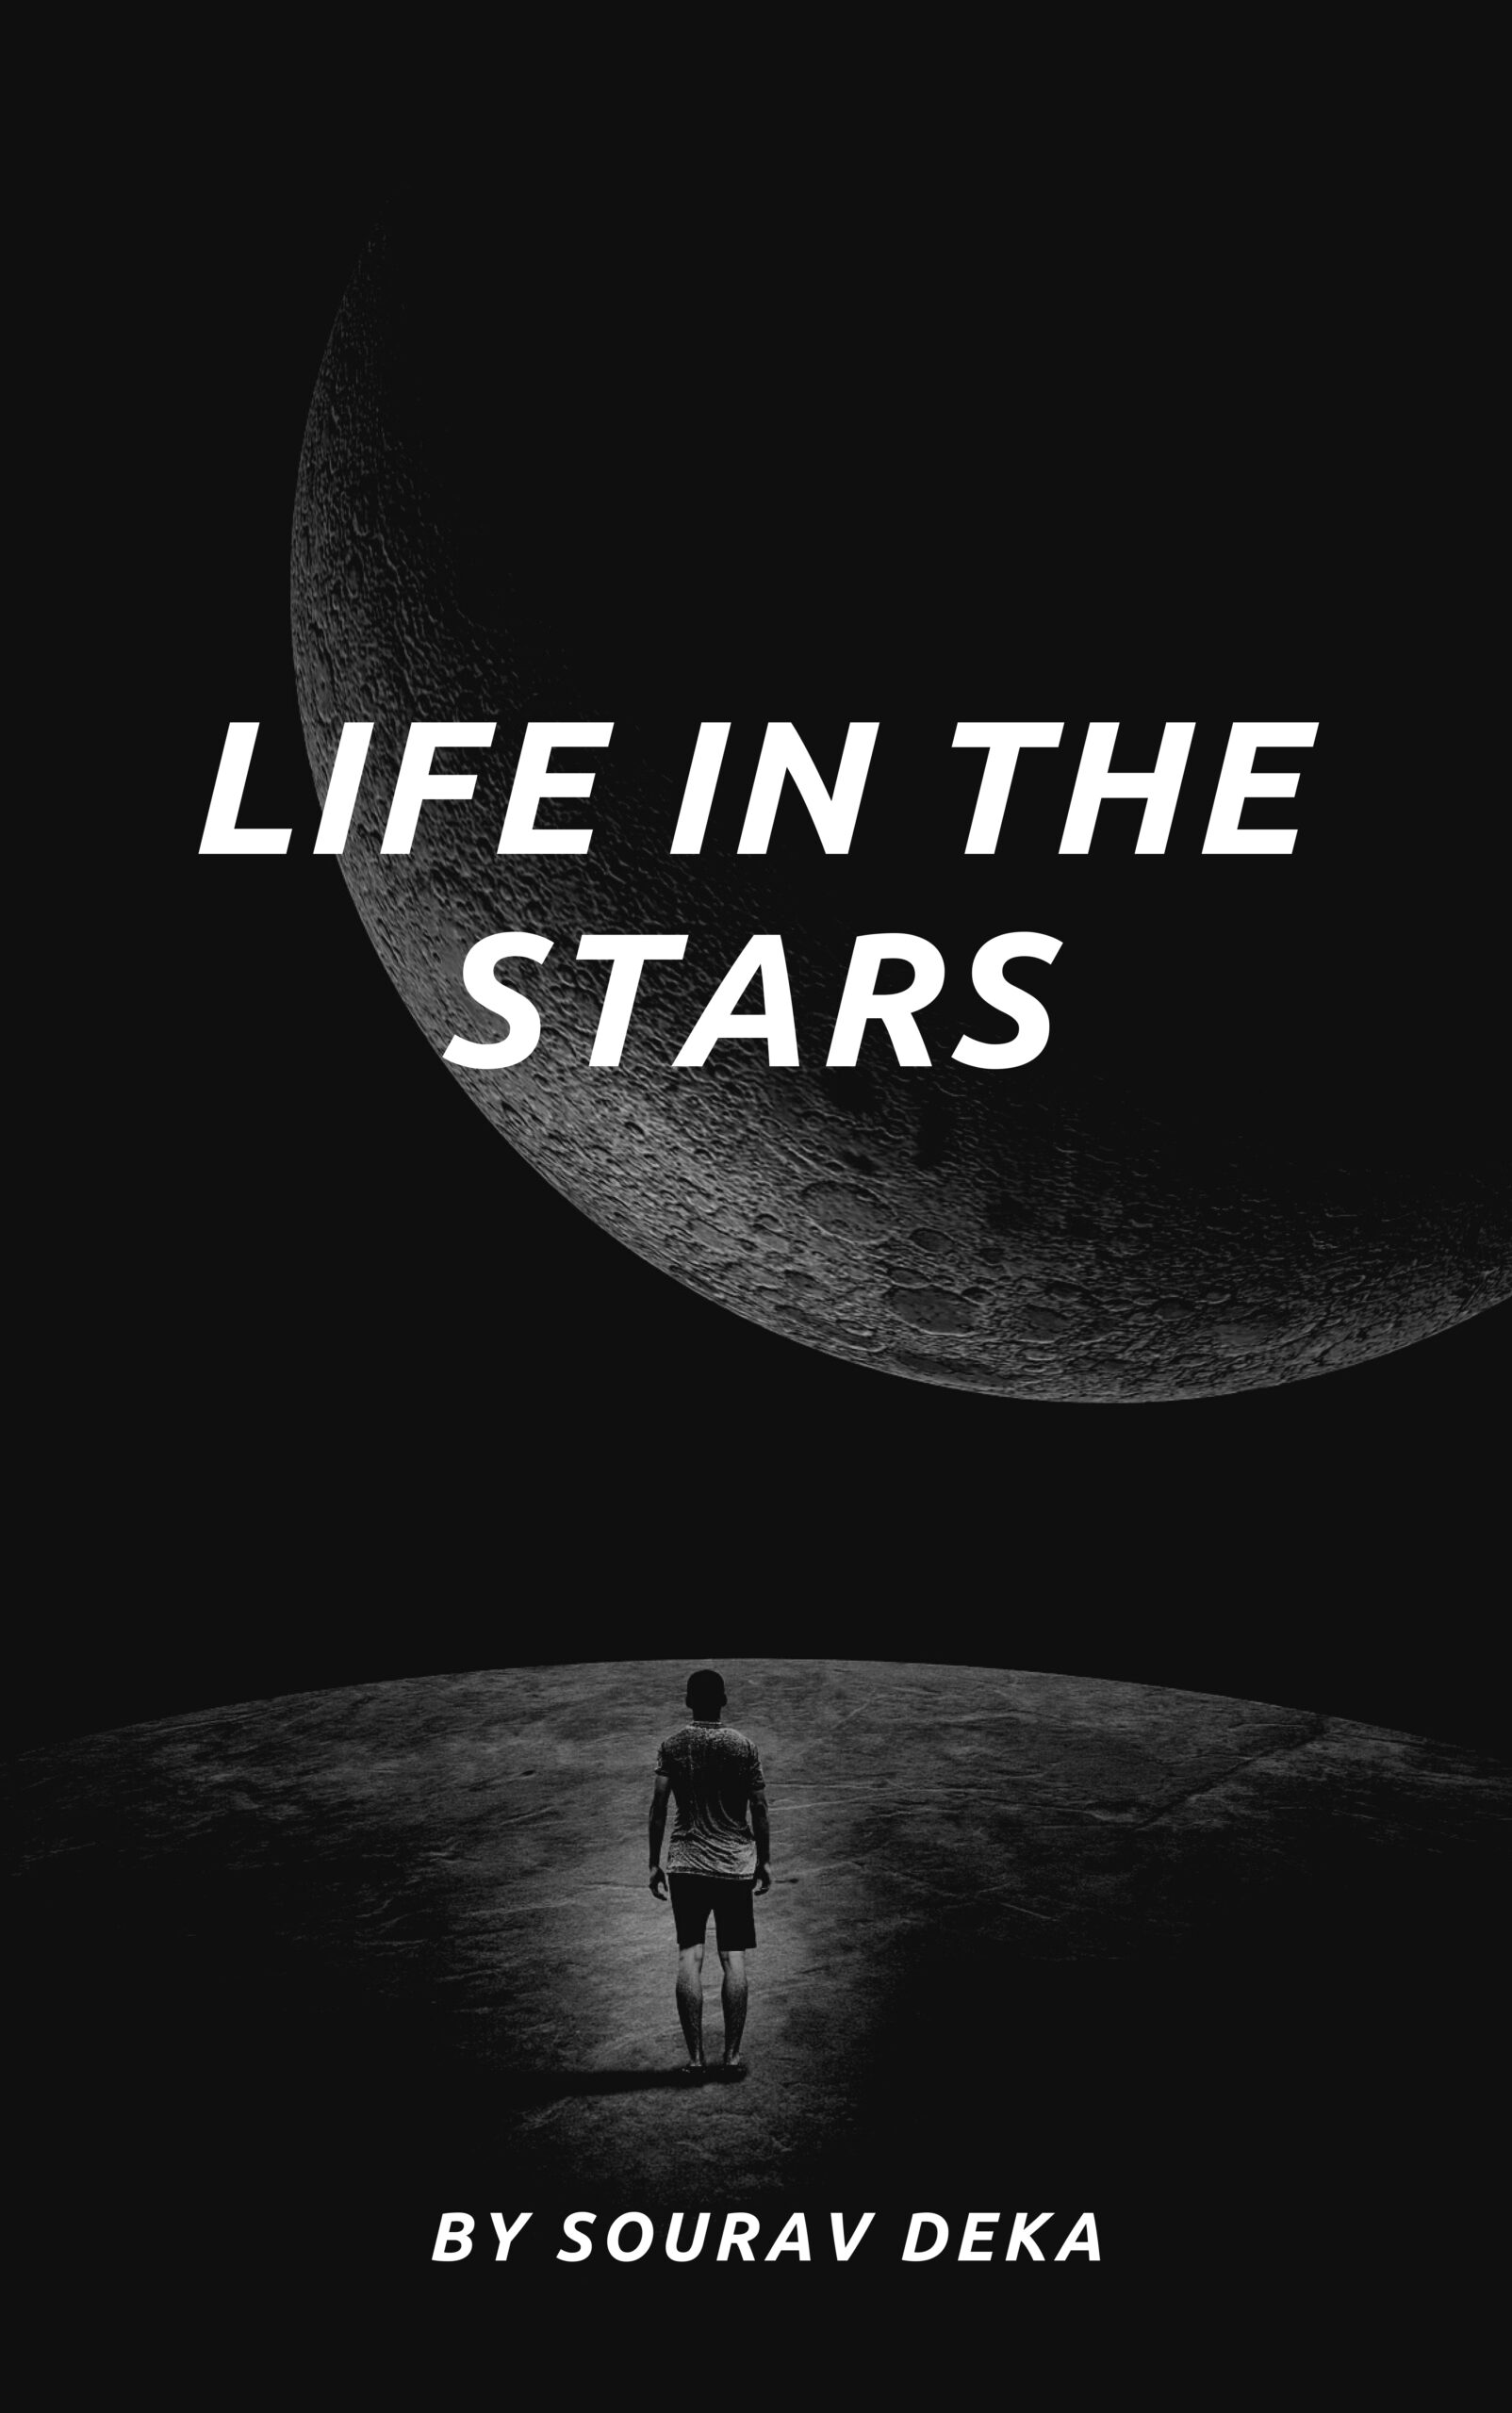 FREE: Life in the stars by Sourav deka